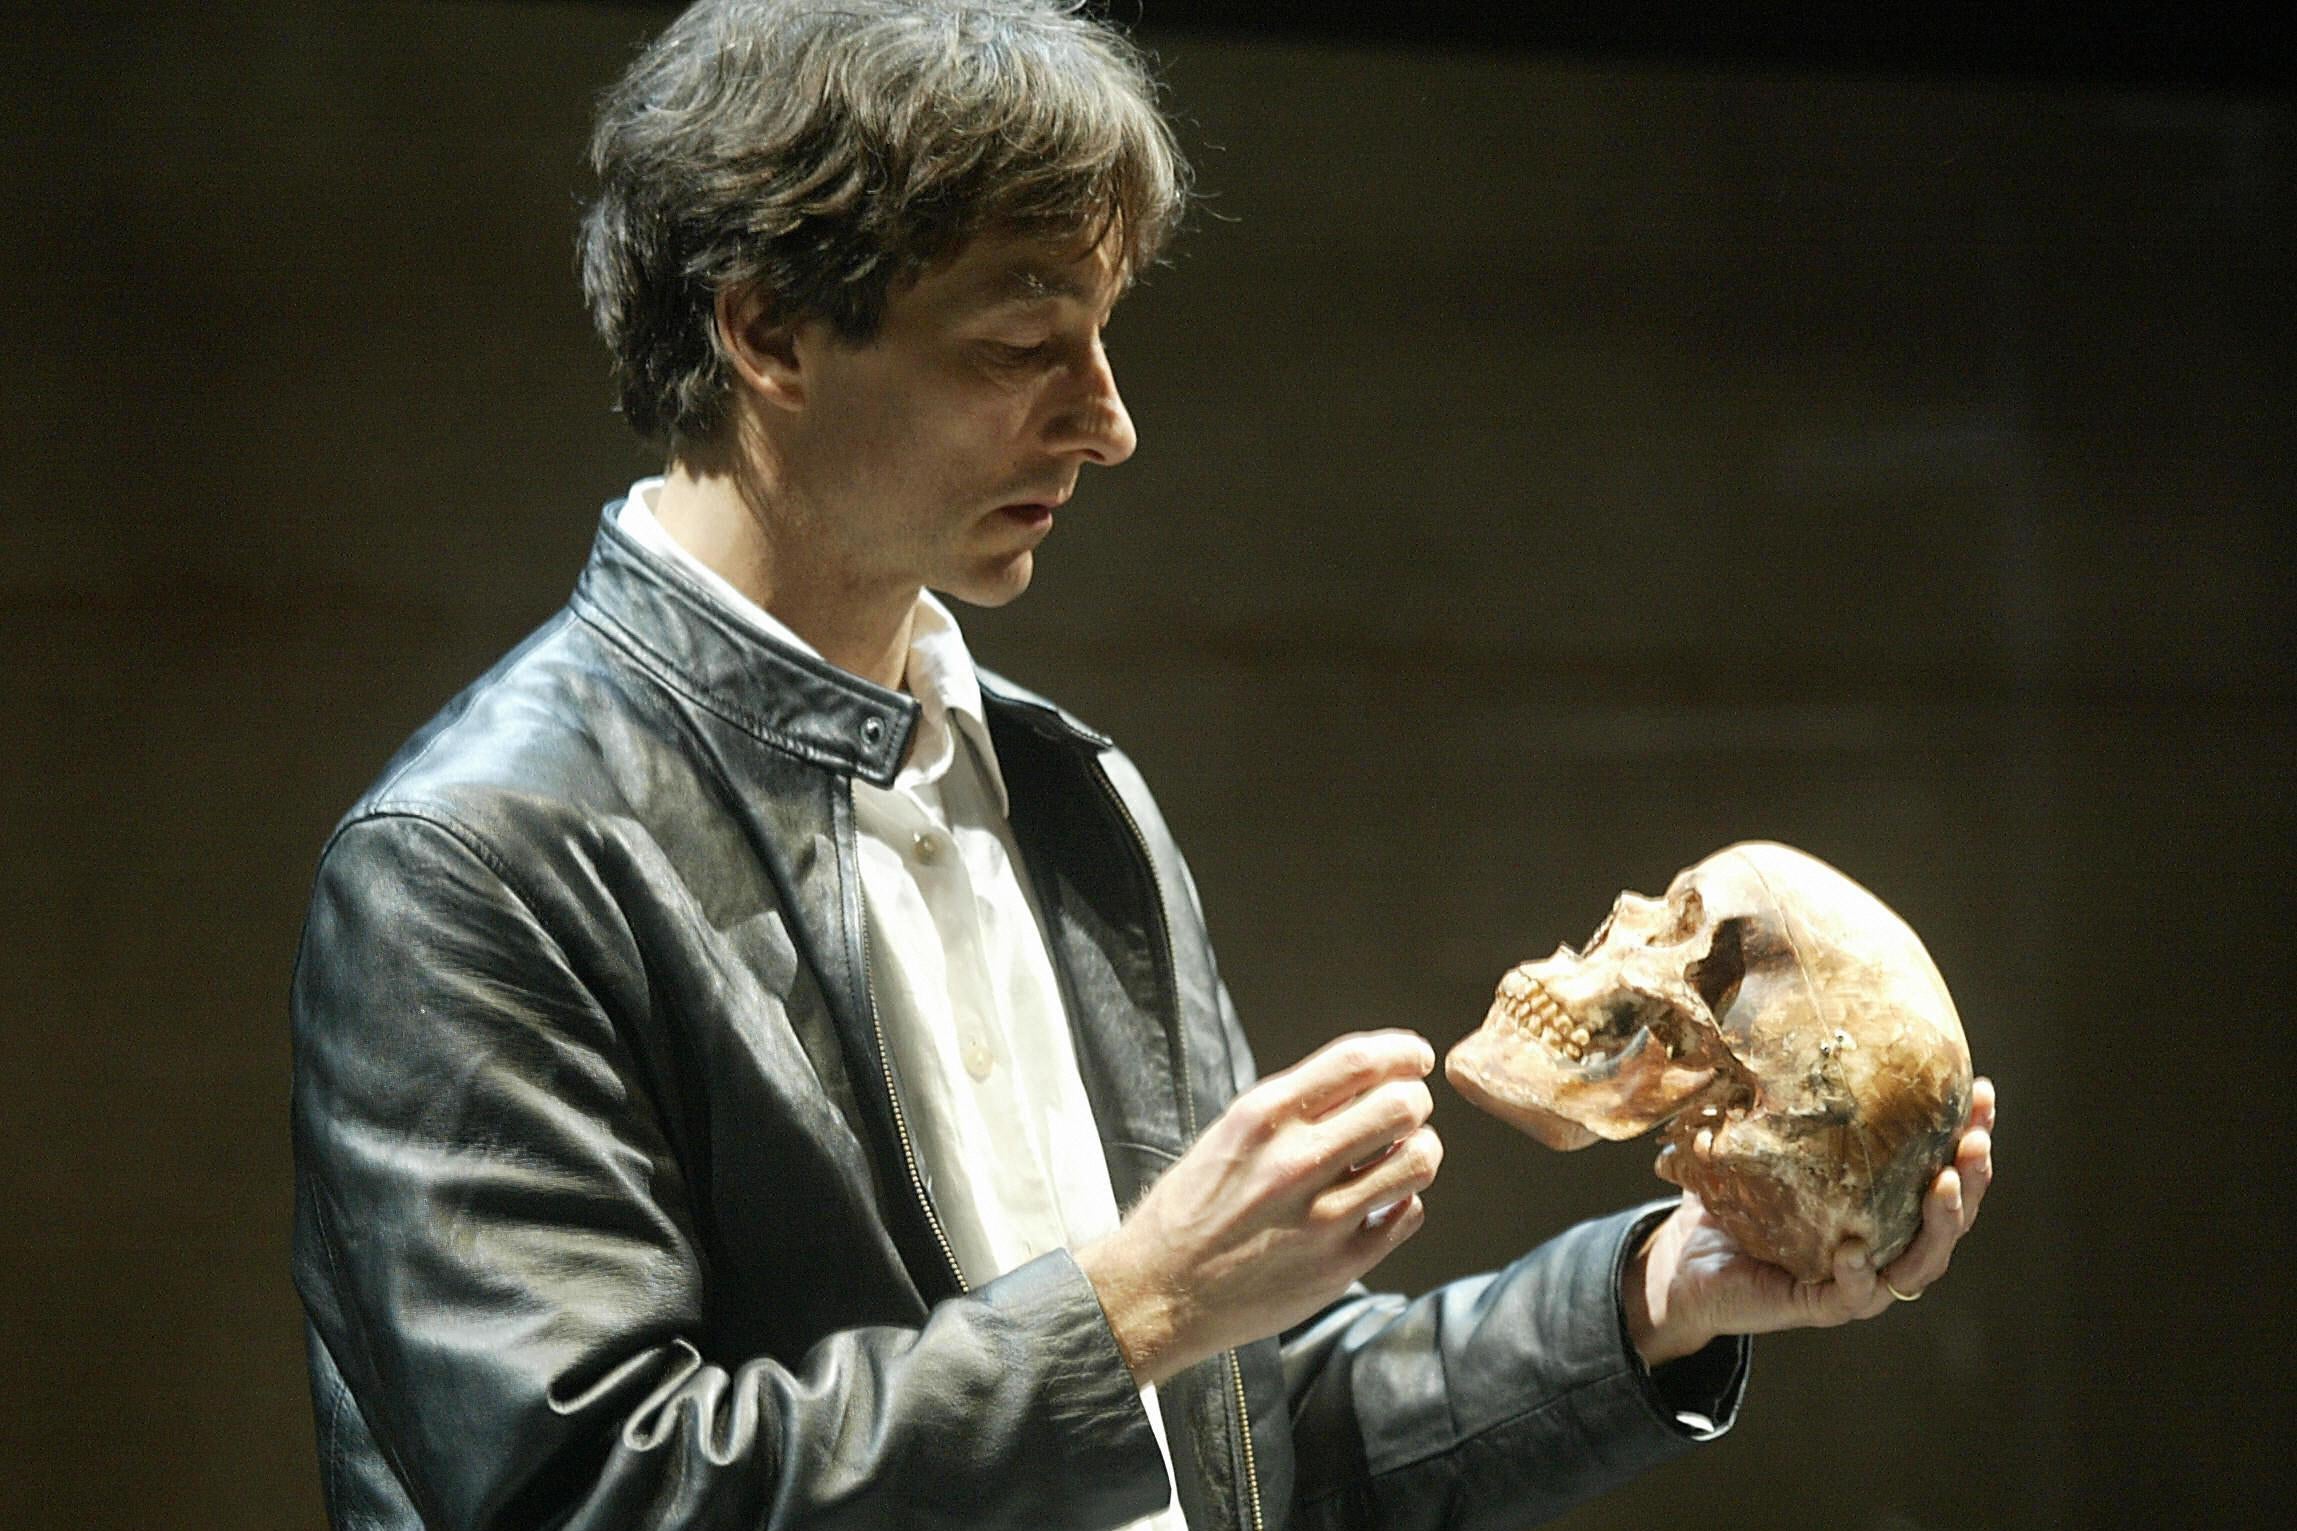 Jonathan Douglas holds a skull as he portrays a futuristic Hamlet at the Shouson theatre in Hong Kong.